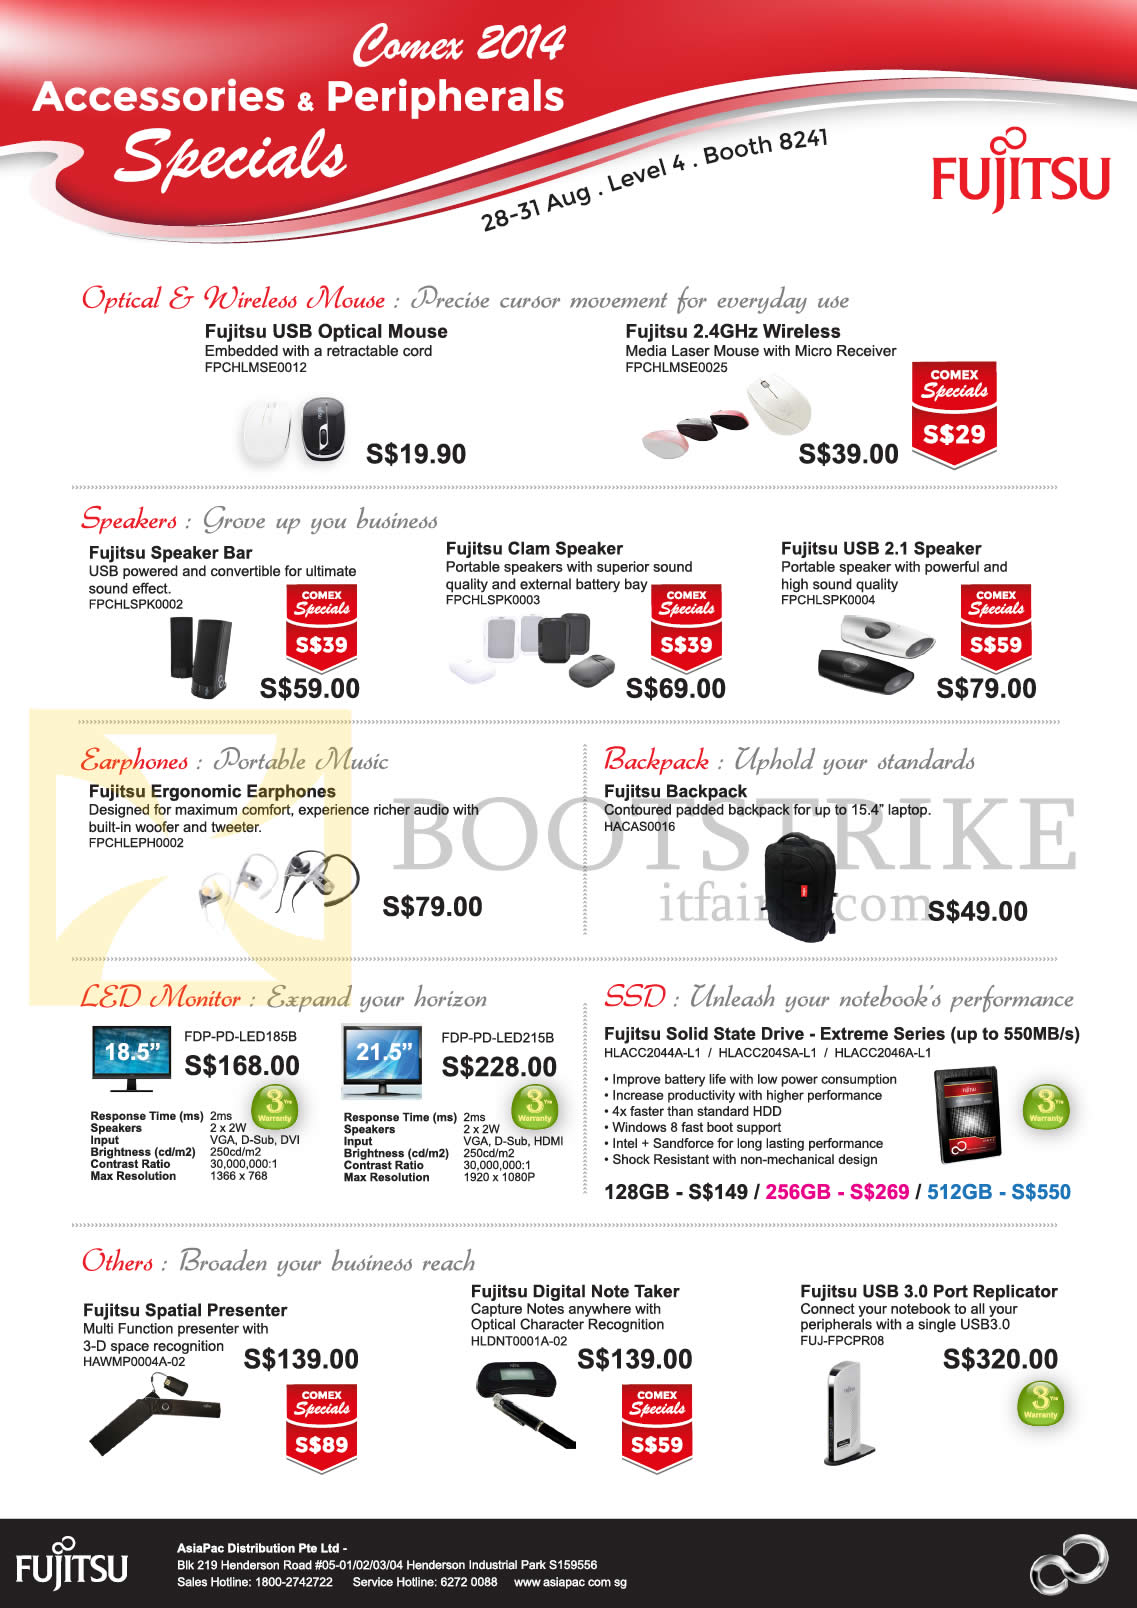 COMEX 2014 price list image brochure of Fujitsu Accessories Mouse, Speakers, LED Monitos, Backpacks, SSDs, LED Monitors, Spatial Presenter, Note Taker, USB Port Replicator